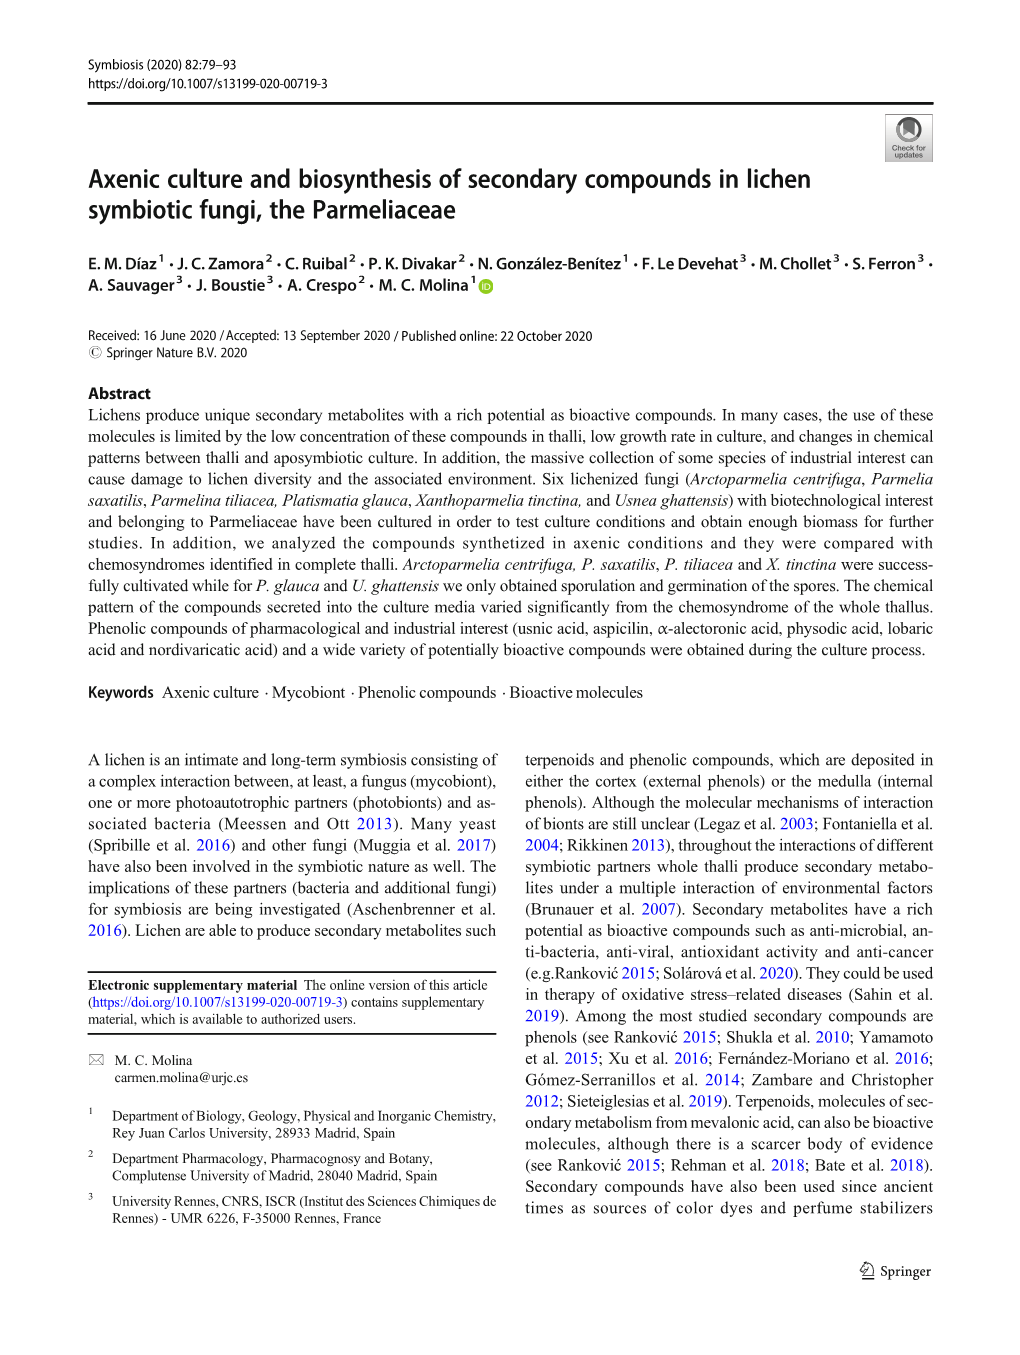 Axenic Culture and Biosynthesis of Secondary Compounds in Lichen Symbiotic Fungi, the Parmeliaceae